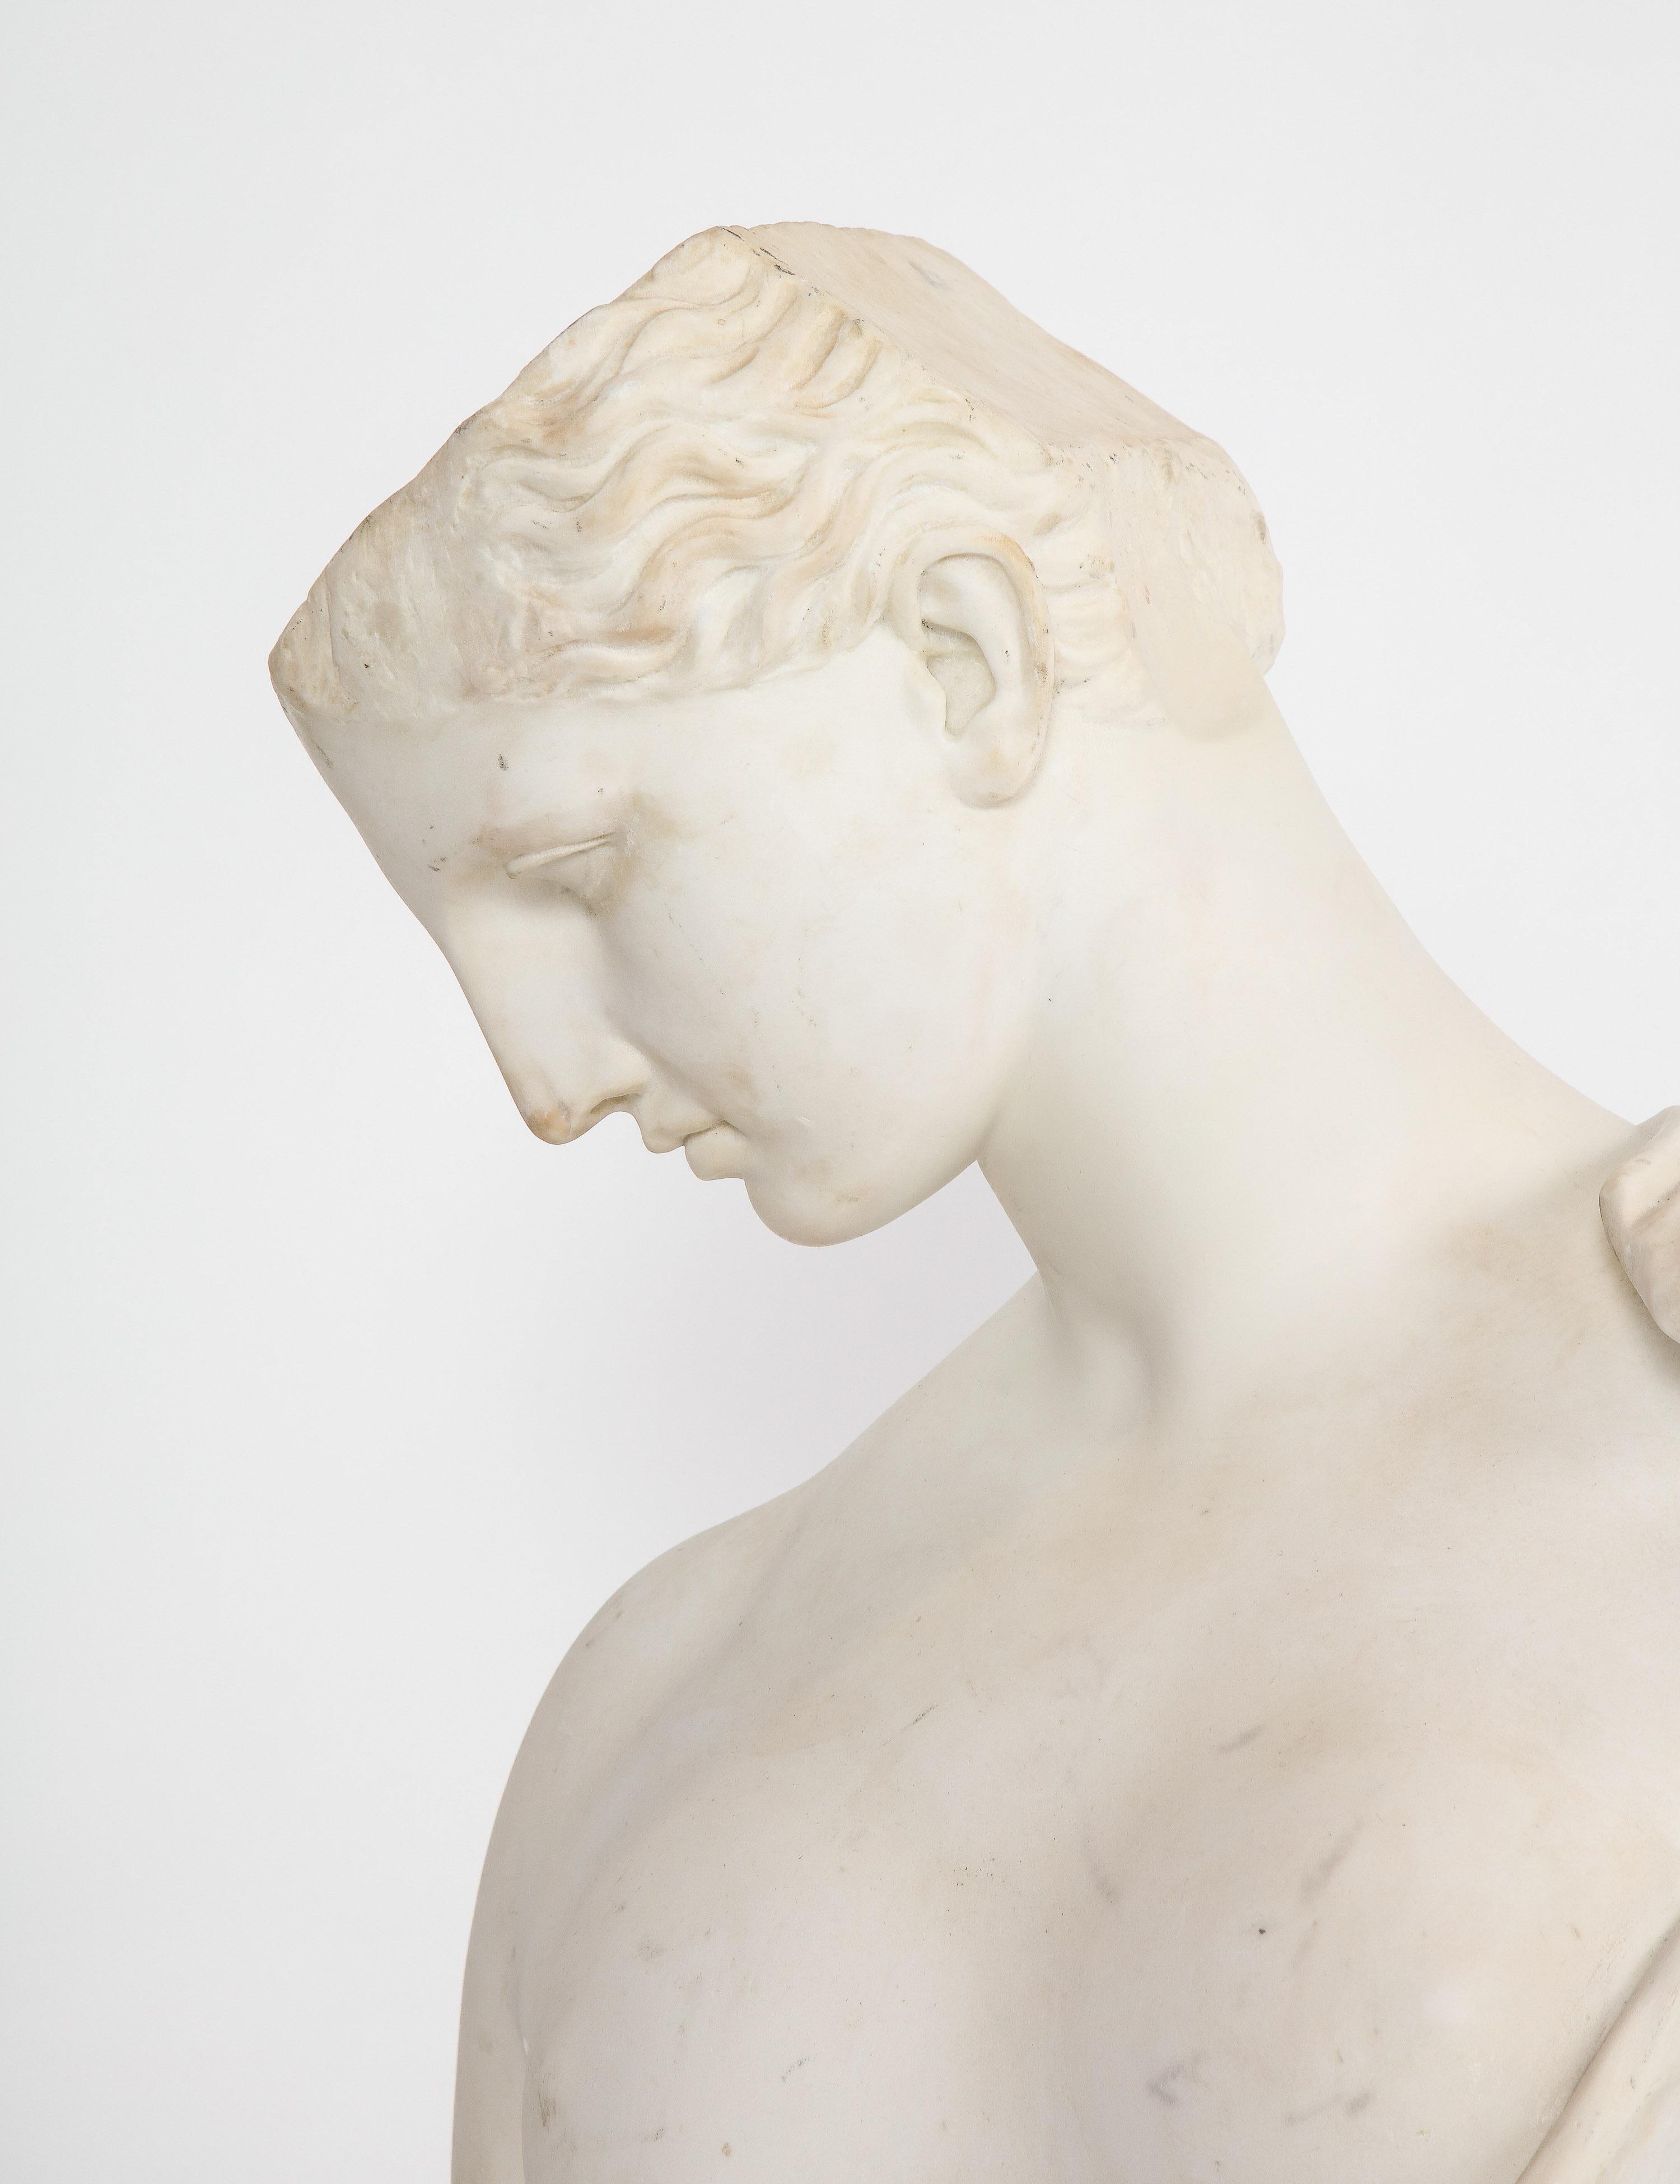 An Antique Italian Neoclassical Marble Bust of Psyche, by Giuseppe Carnevale - Beige Figurative Sculpture by Unknown